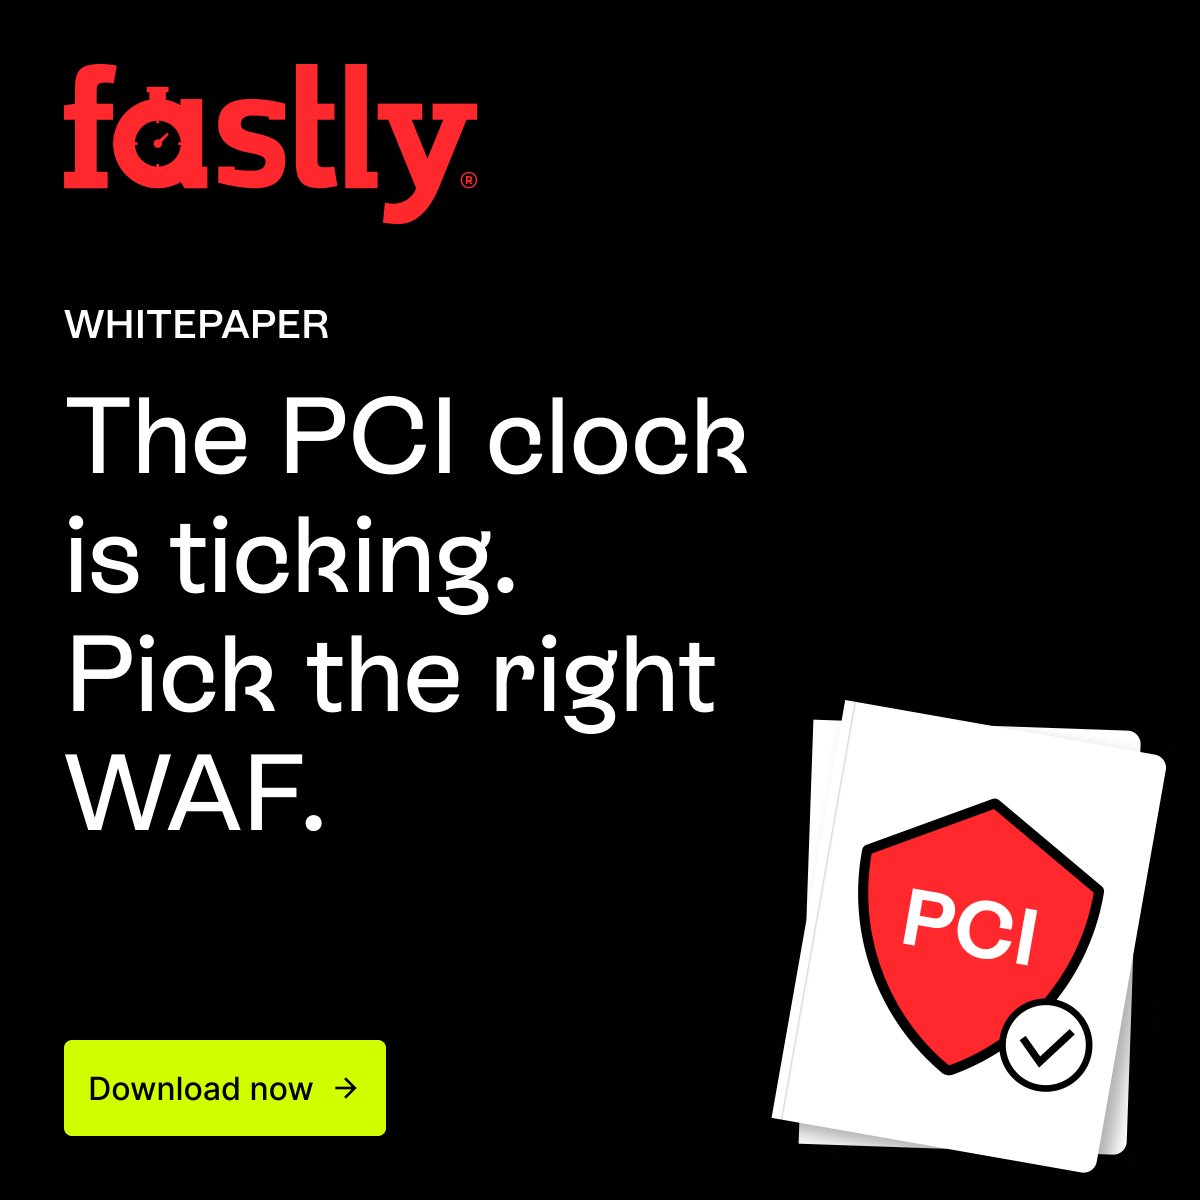 Time's running out! ⏰ Is your organization ready for PCI Data Security Standard 4.0? Our latest whitepaper is helping you stay ahead of compliance: fastly.us/4cV5mGC